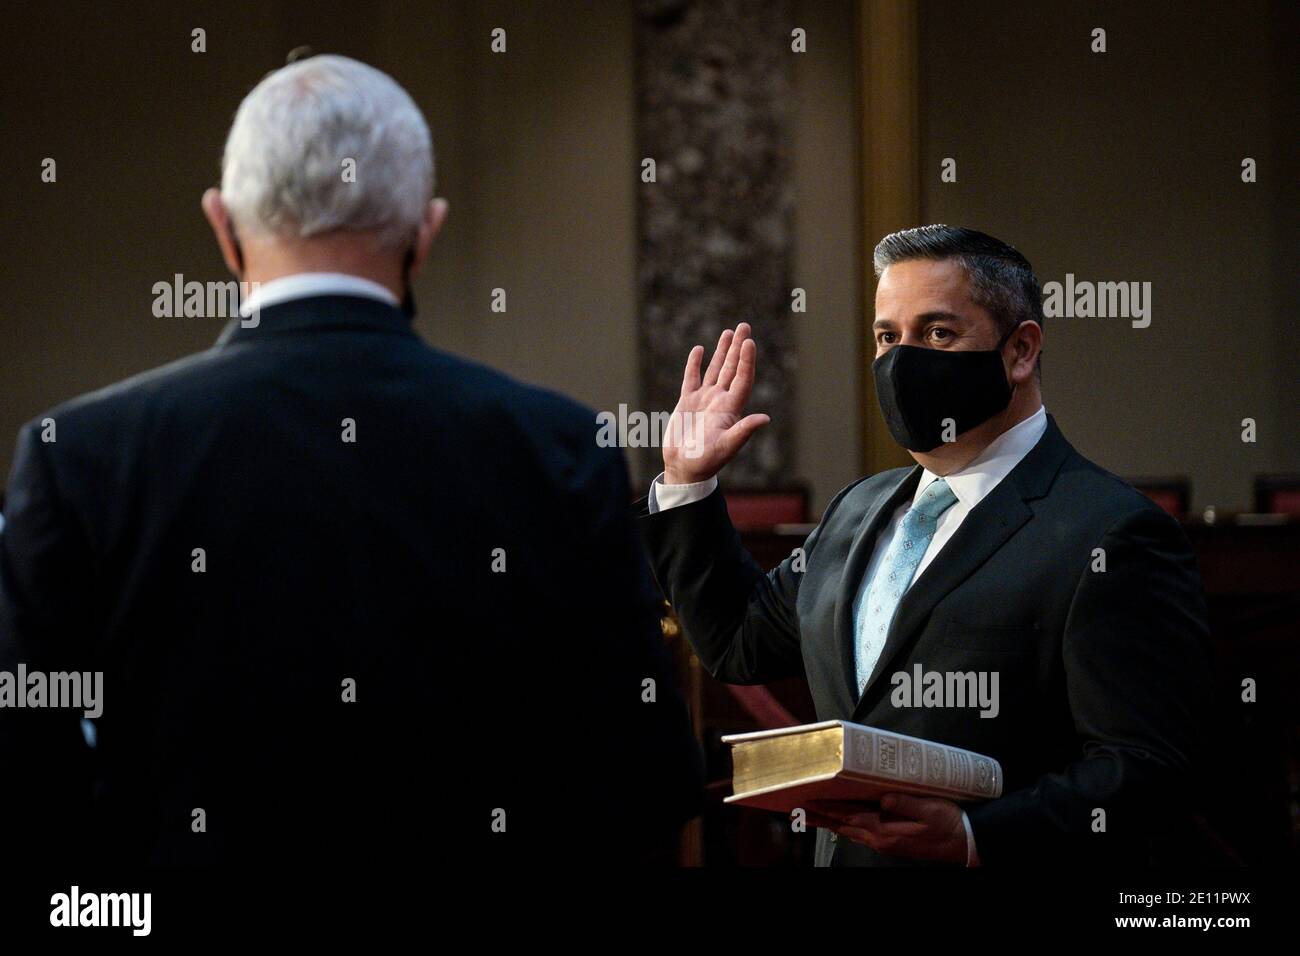 Washington, USA. 03rd Jan, 2021. Vice President Mike Pence administers the Senate oath of office to Ben Ray Lujan (D-NM), during a mock swearing-in ceremony in the Old Senate Chamber on Capitol Hill on January 3, 2021 in Washington, DC. (Photo by Pete Marovich/Pool/Sipa USA) Credit: Sipa USA/Alamy Live News Stock Photo